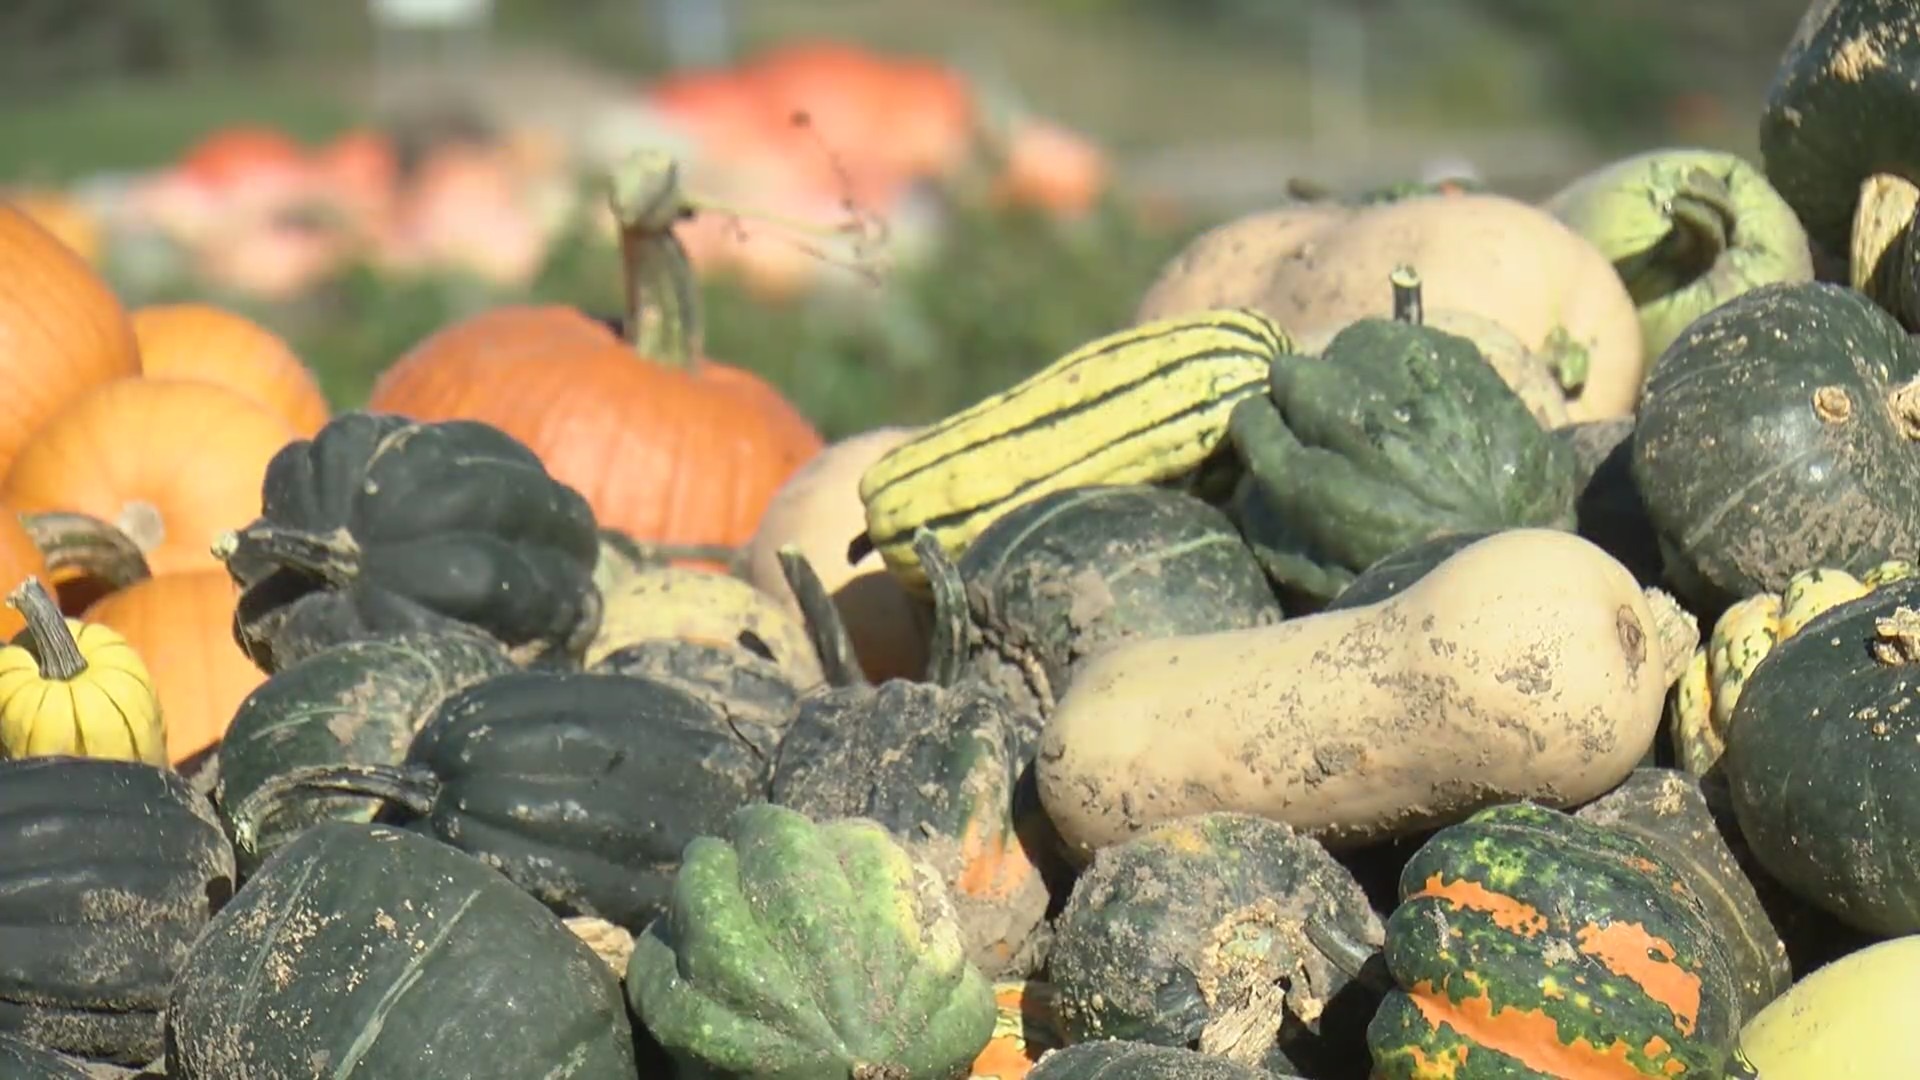 ‘Farming Is A Gamble’: Some Minnesota Pumpkin, Apple Farms Seeing Smaller Yields Amid Drought